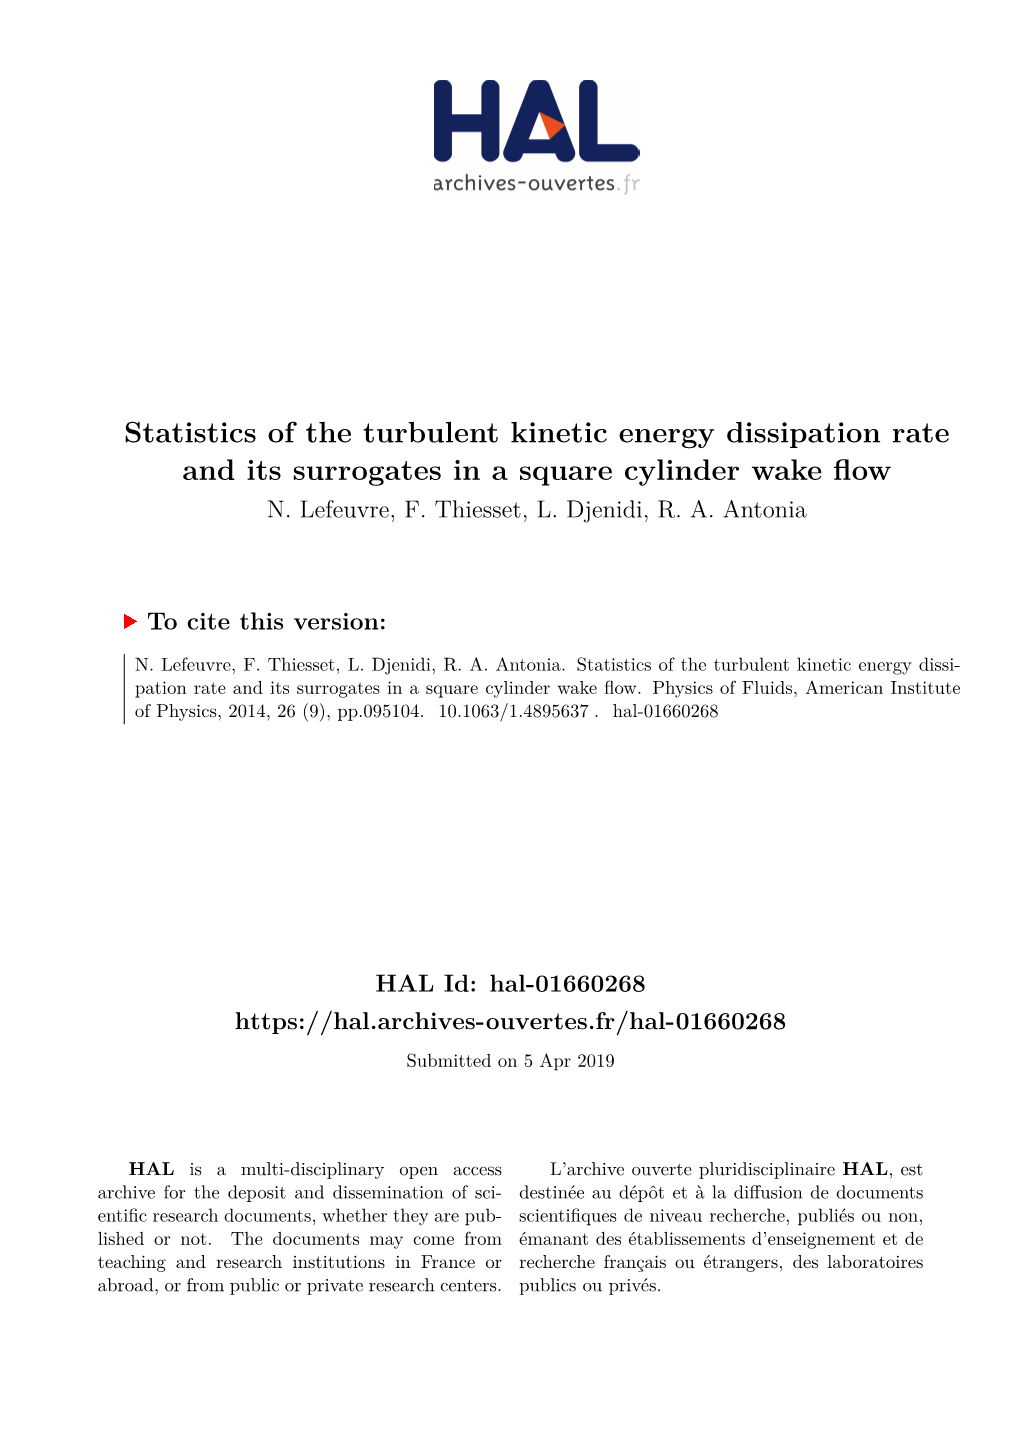 Statistics of the Turbulent Kinetic Energy Dissipation Rate and Its Surrogates in a Square Cylinder Wake Flow N